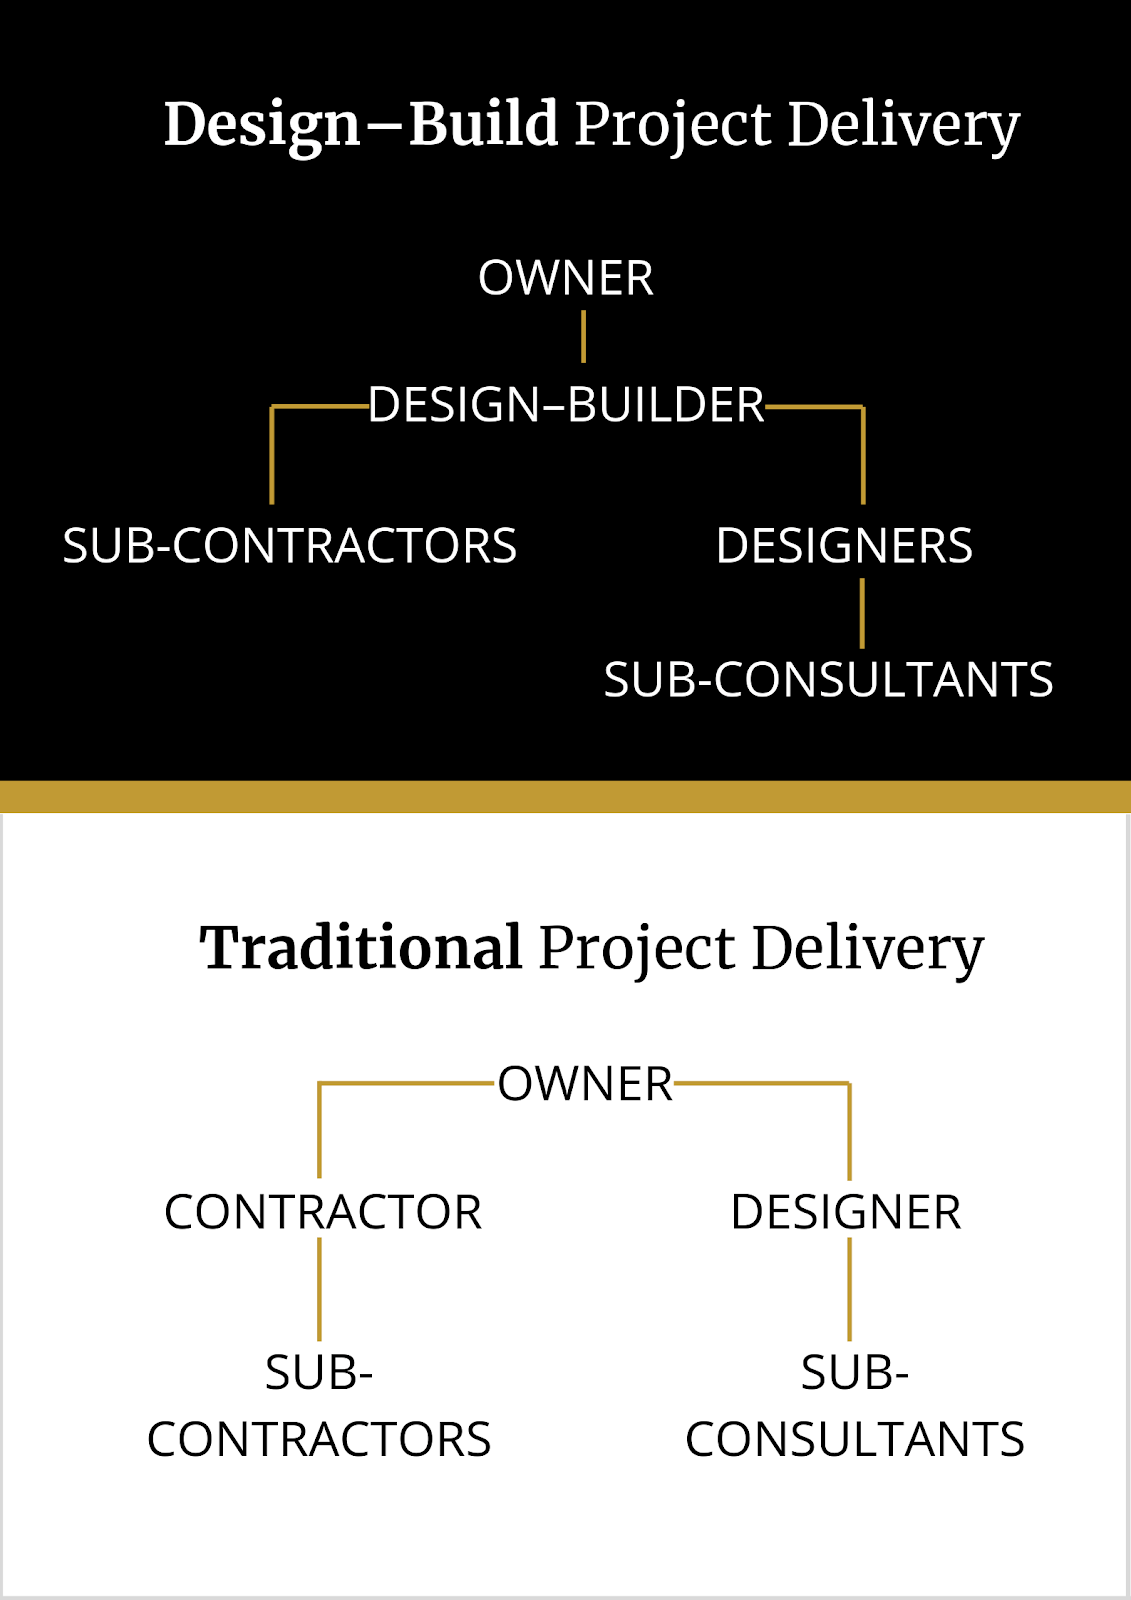 design build project delivery chart